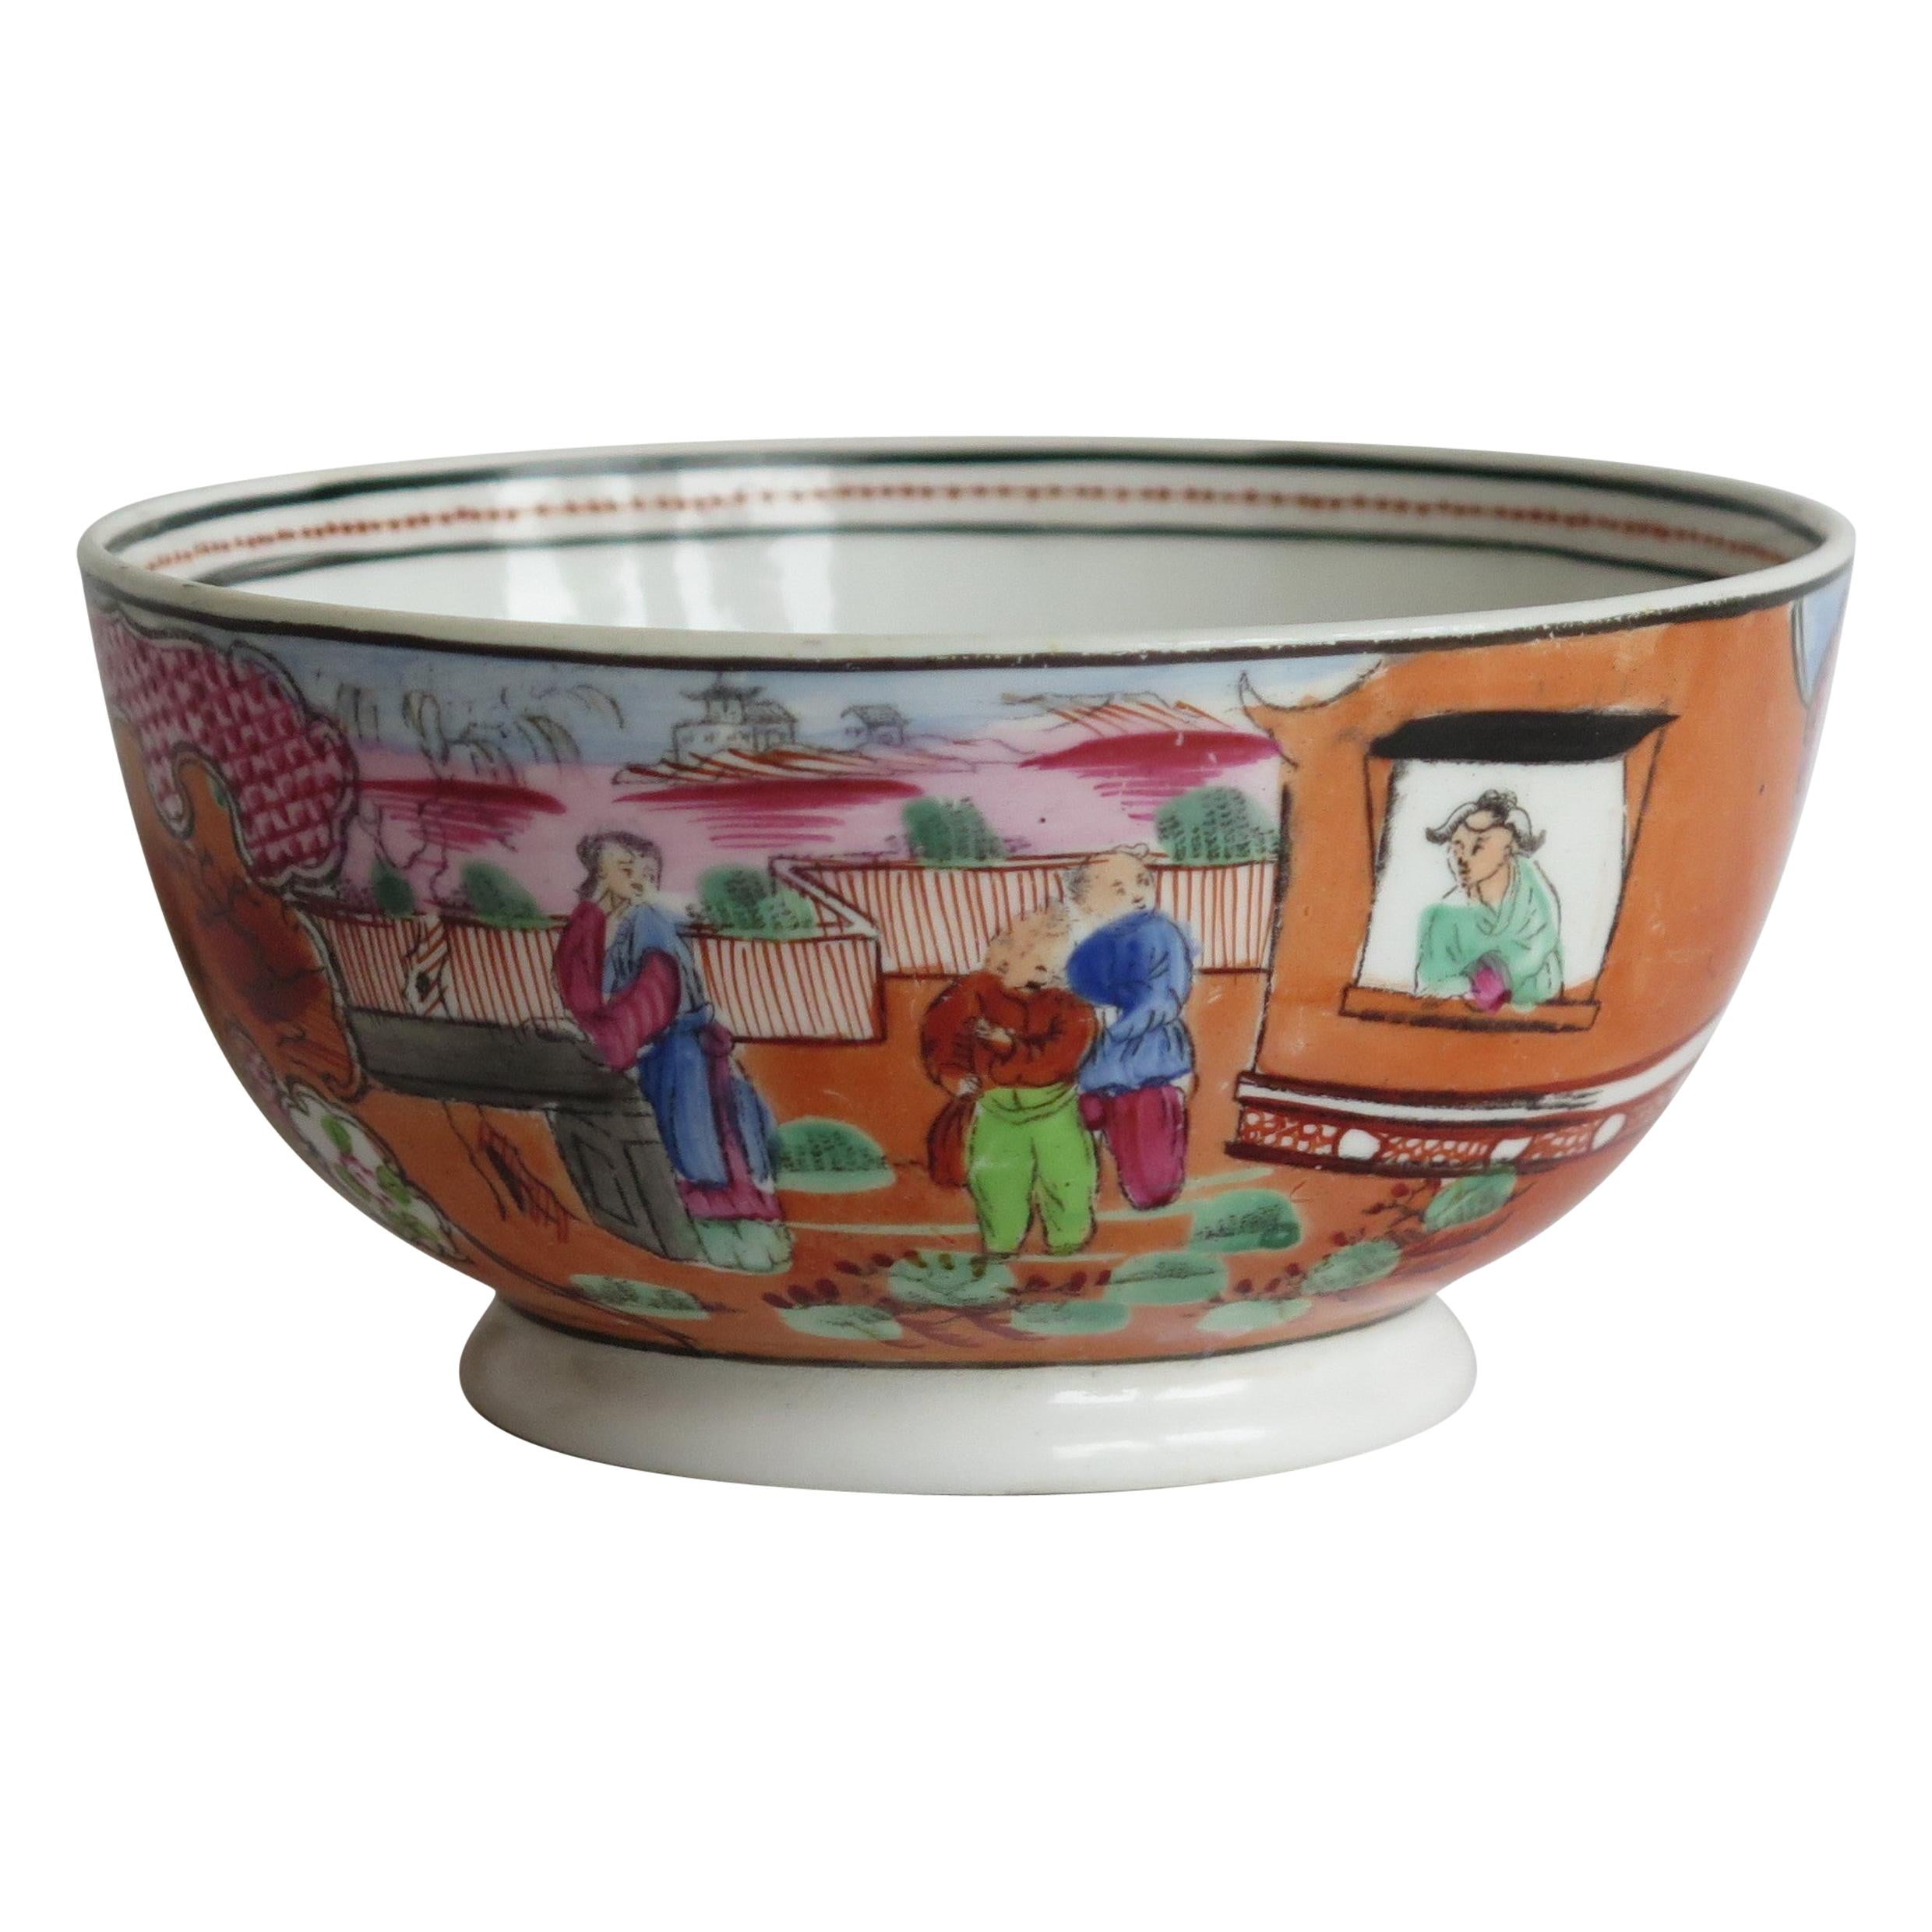 Early New Hall Porcelain Bowl with Boy in Window Pattern No. 425, circa 1800